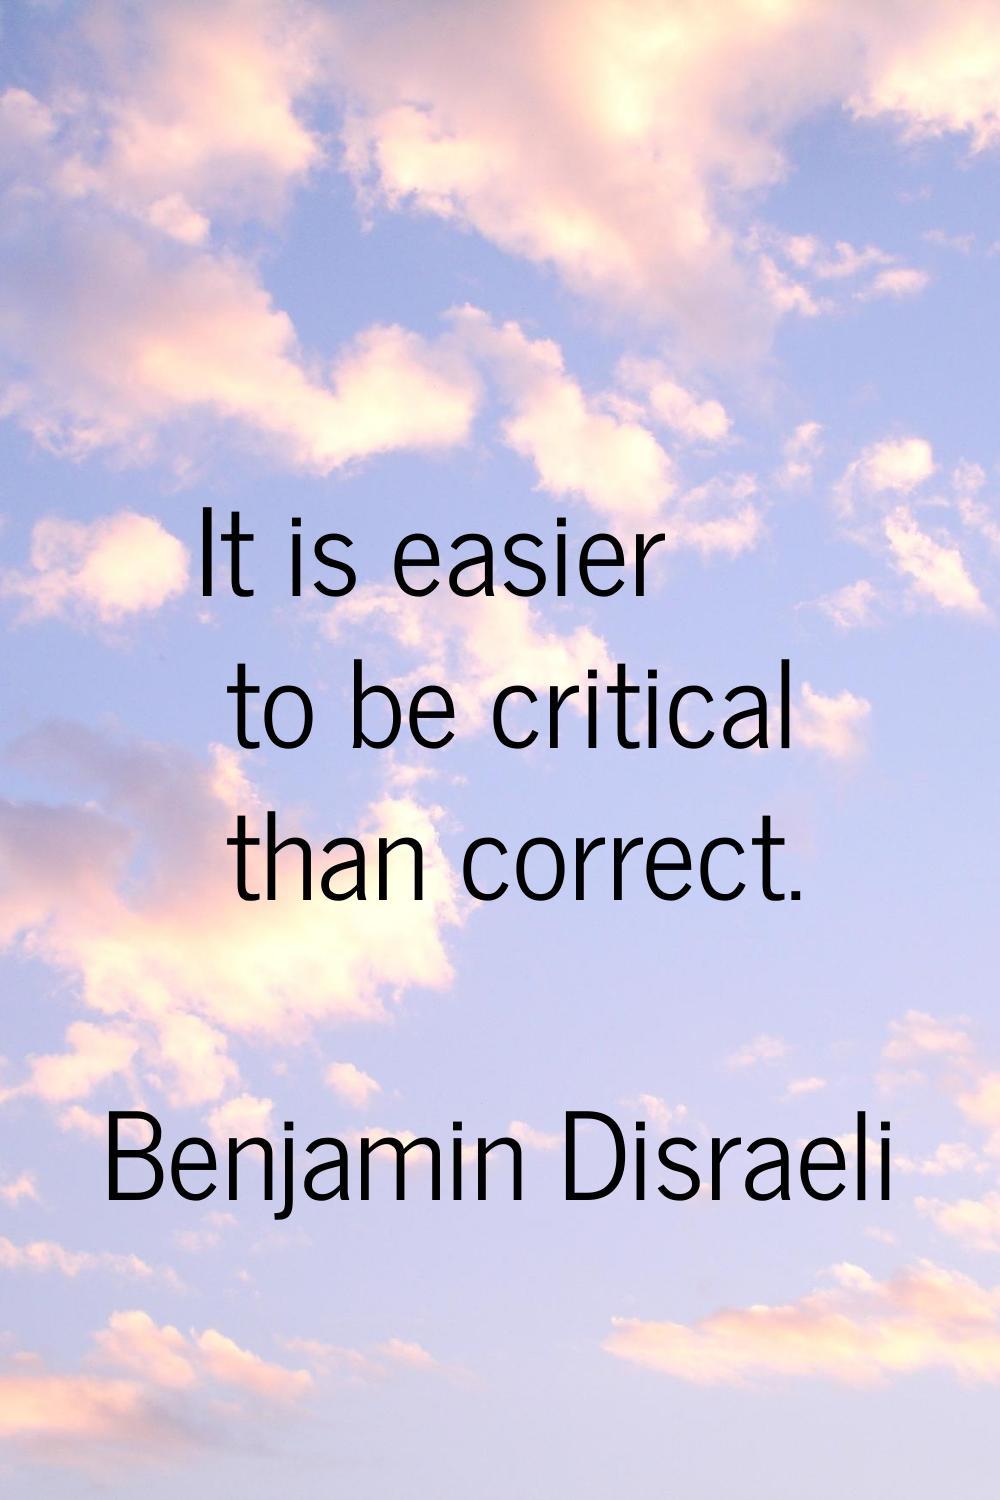 It is easier to be critical than correct.